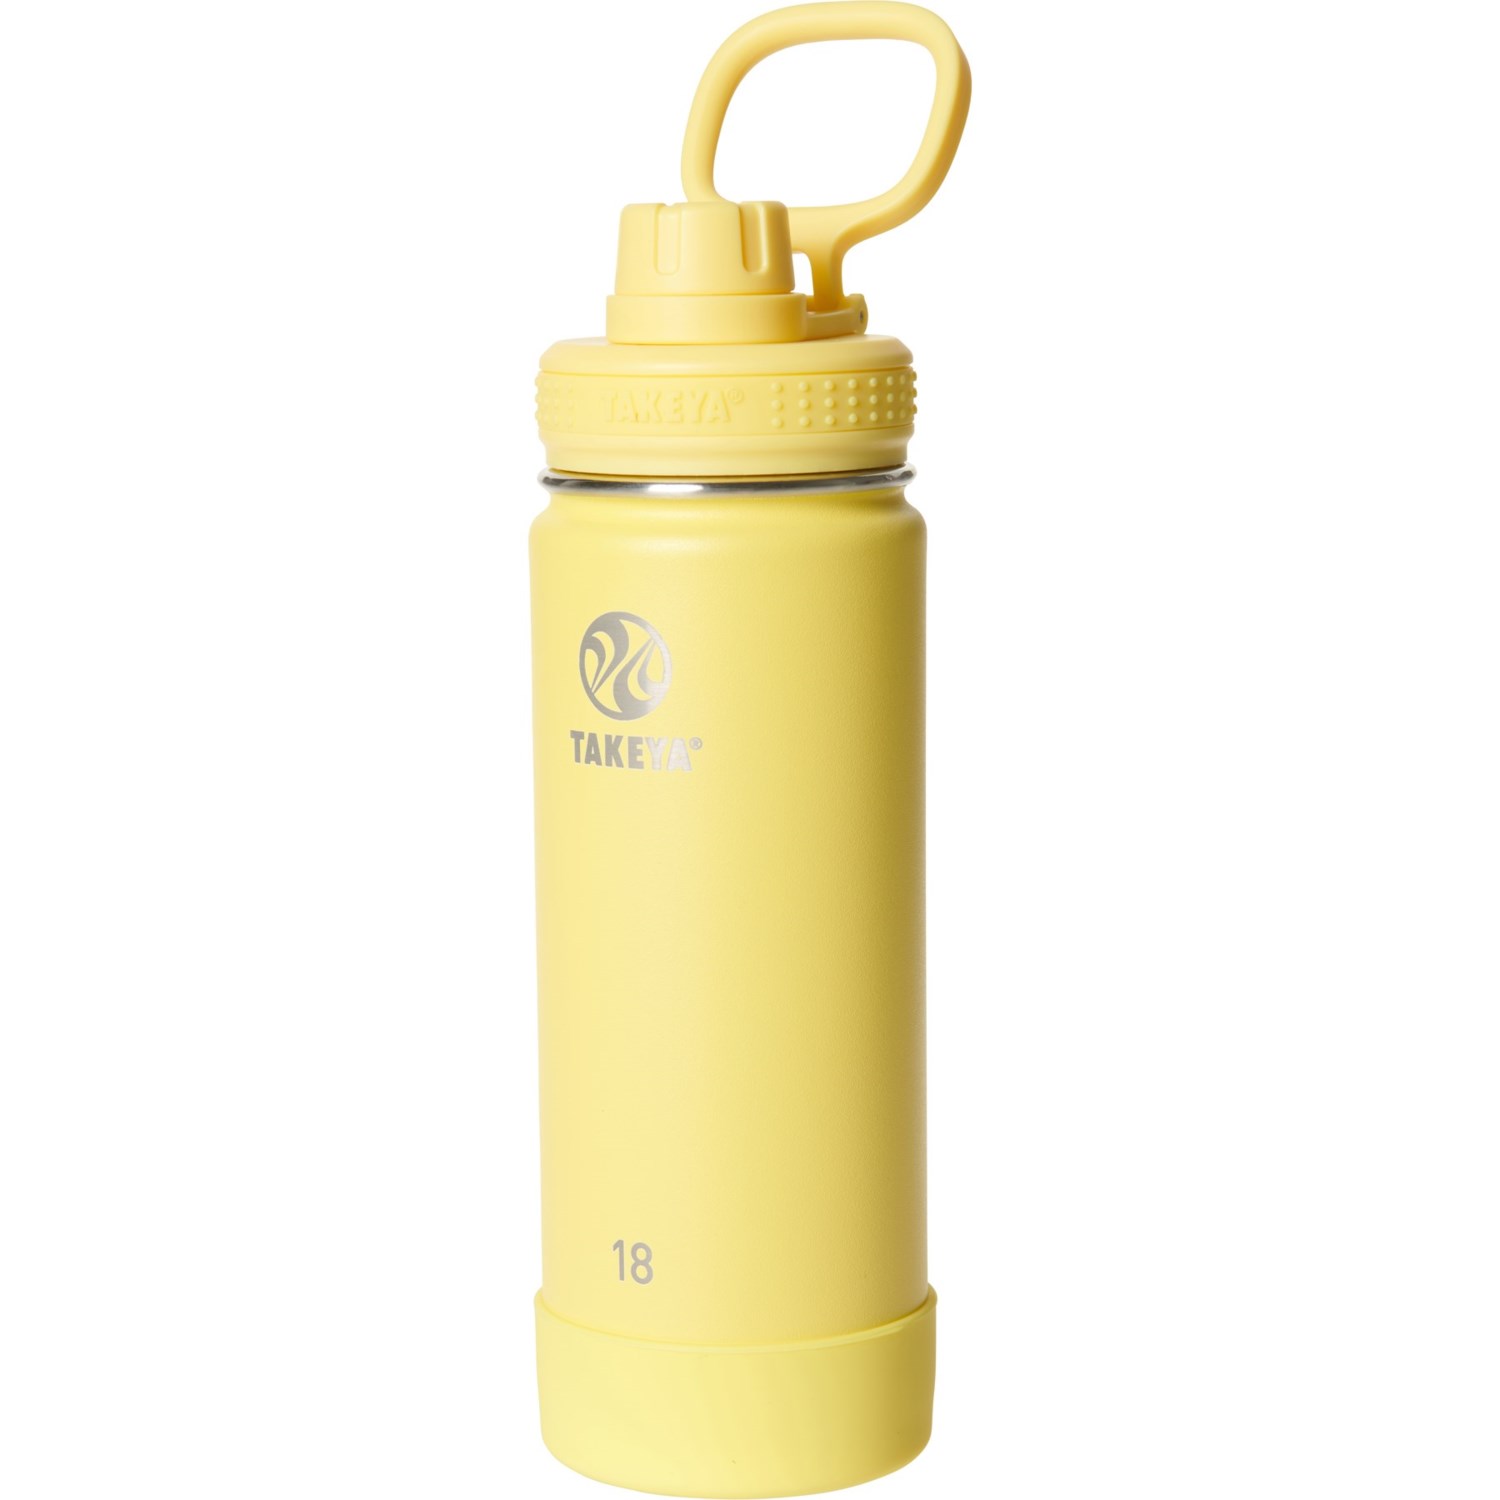  Takeya Actives Kids Insulated Stainless Steel Kids